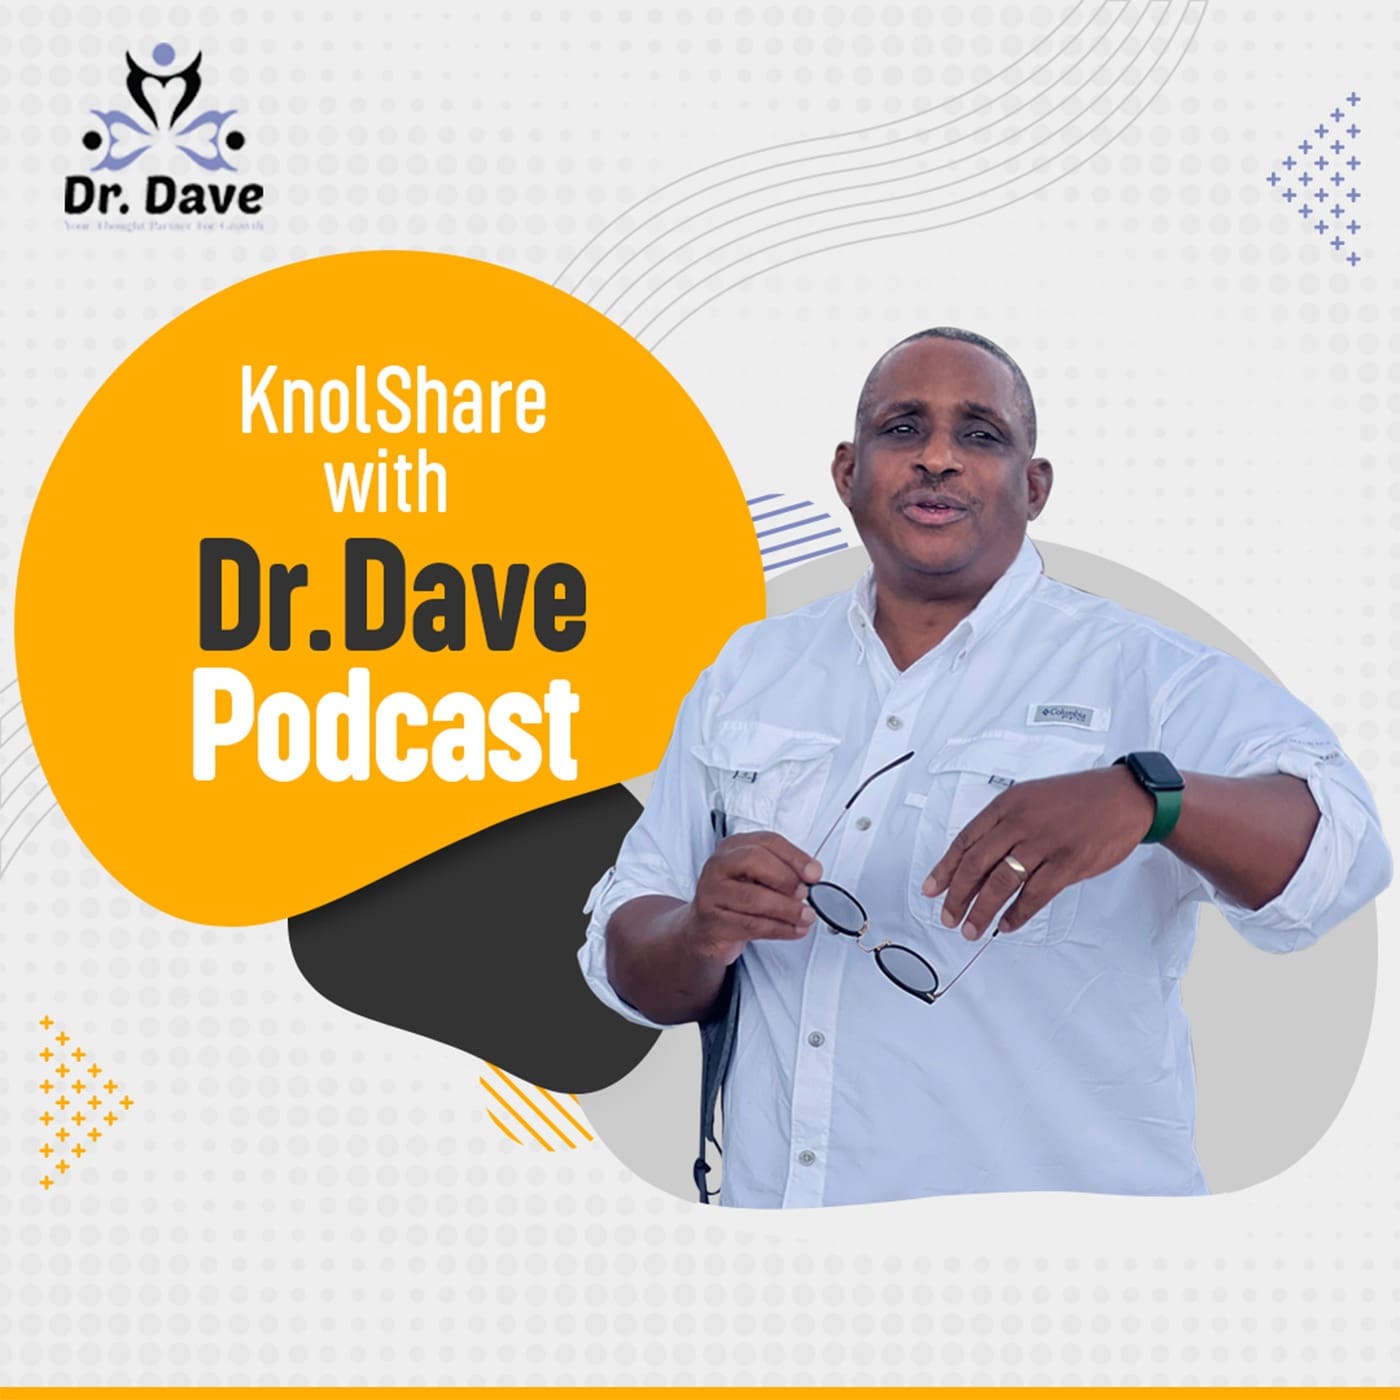 KnolShare with Dr. Dave Podcast banner